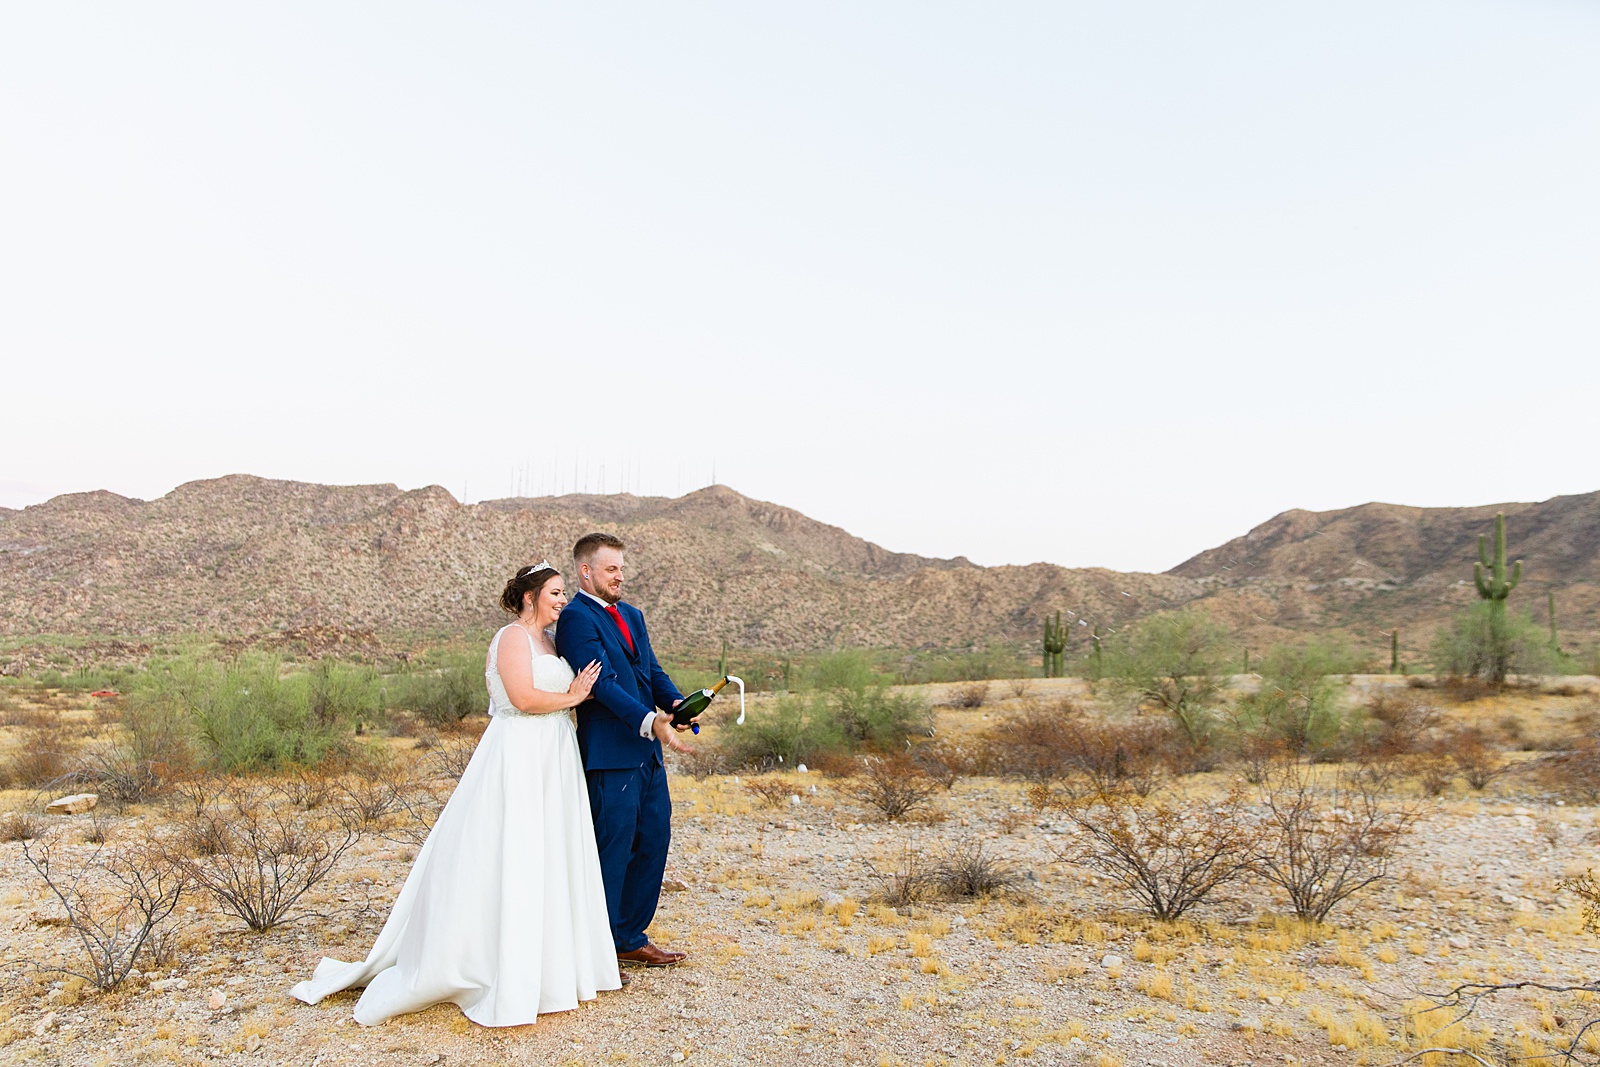 Bride and groom popping champagne together during their intimate desert wedding by Arizona wedding photographer Juniper and Co Photography.